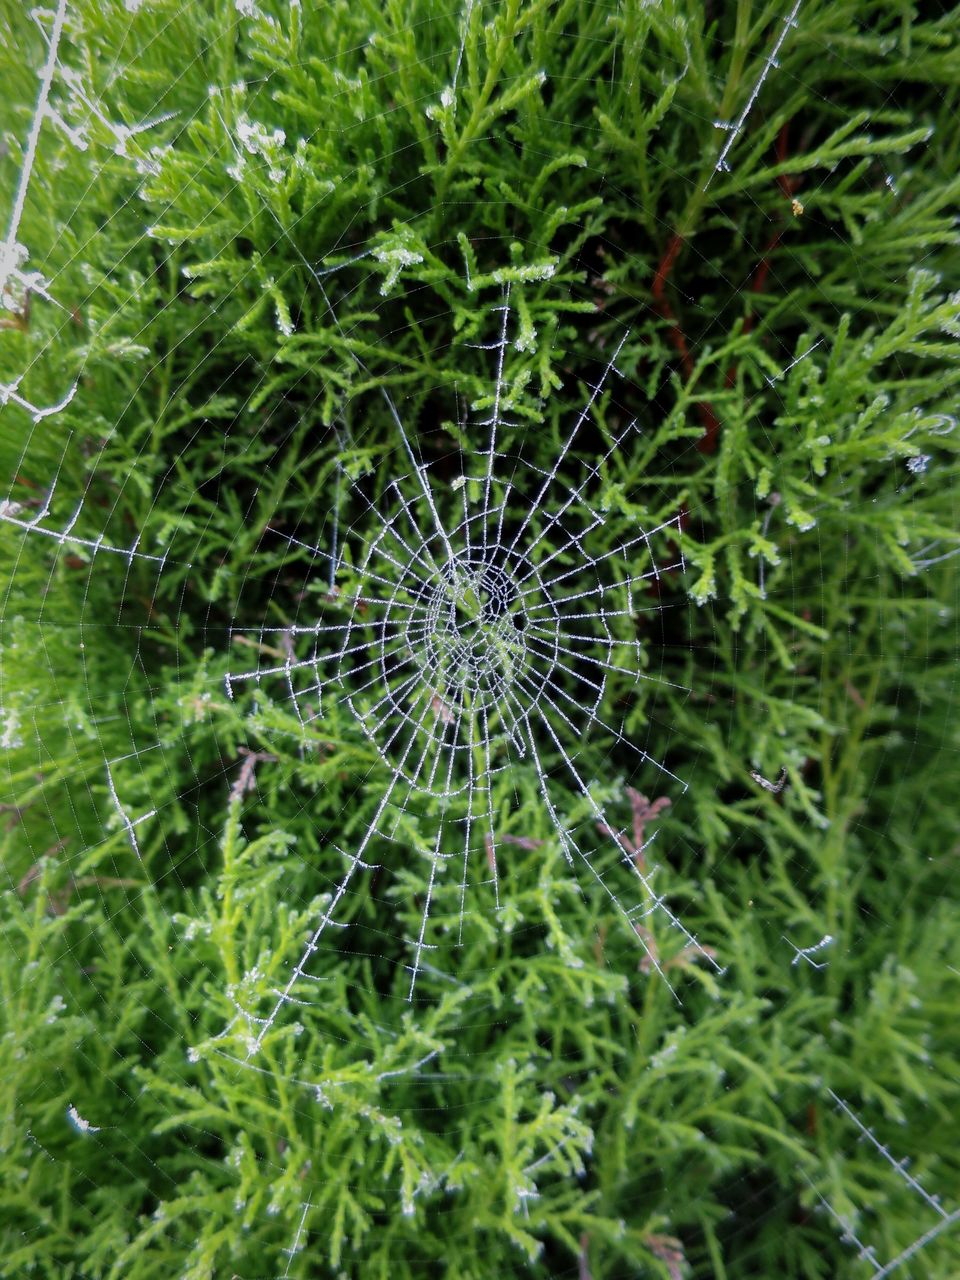 HIGH ANGLE VIEW OF SPIDER ON WEB OUTDOORS